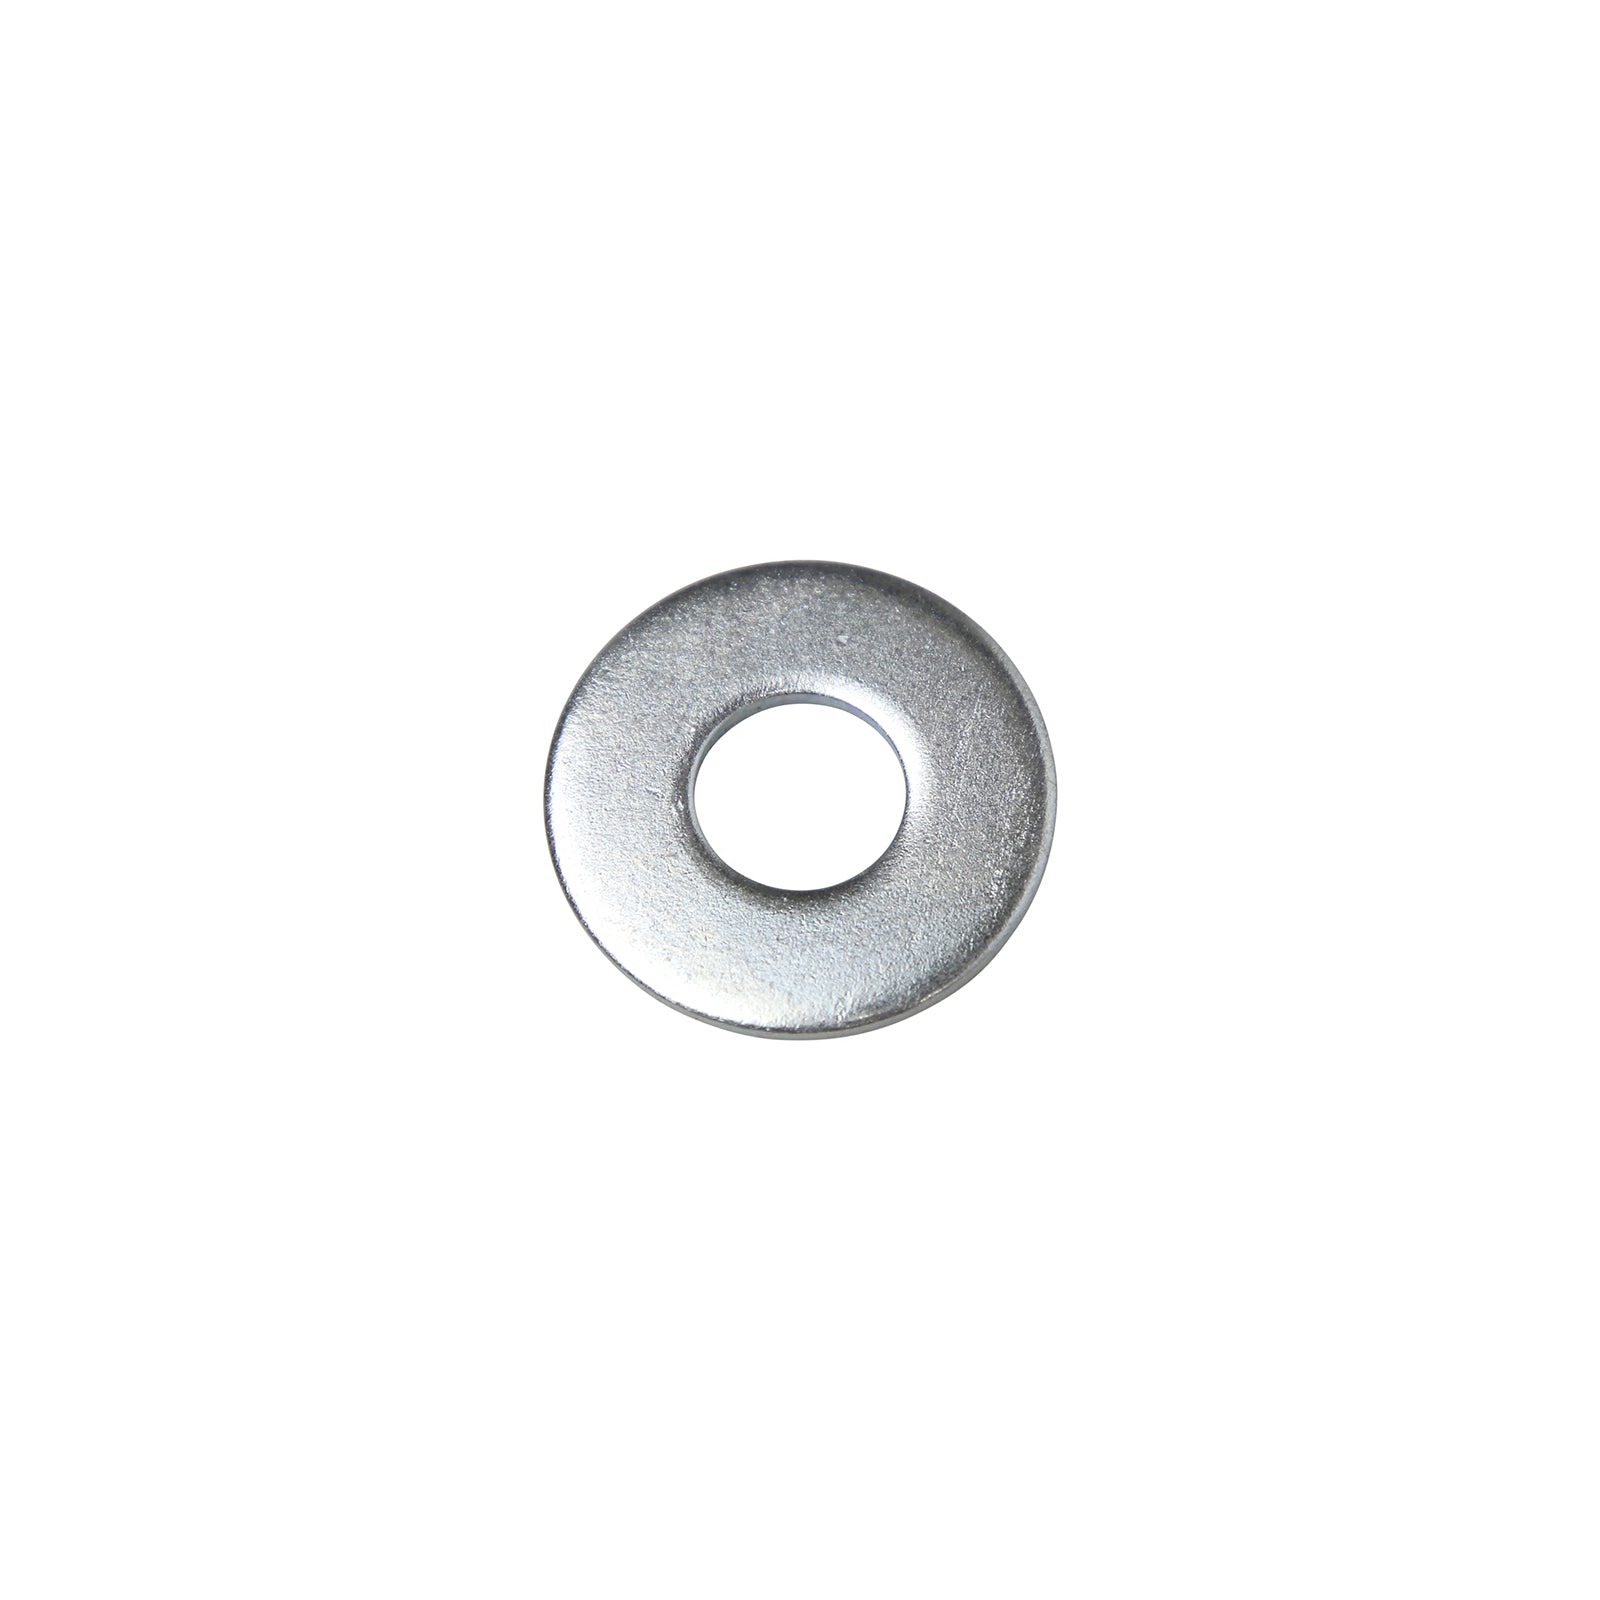 1/2" Conquest USS Flat Washer - Zinc Plated